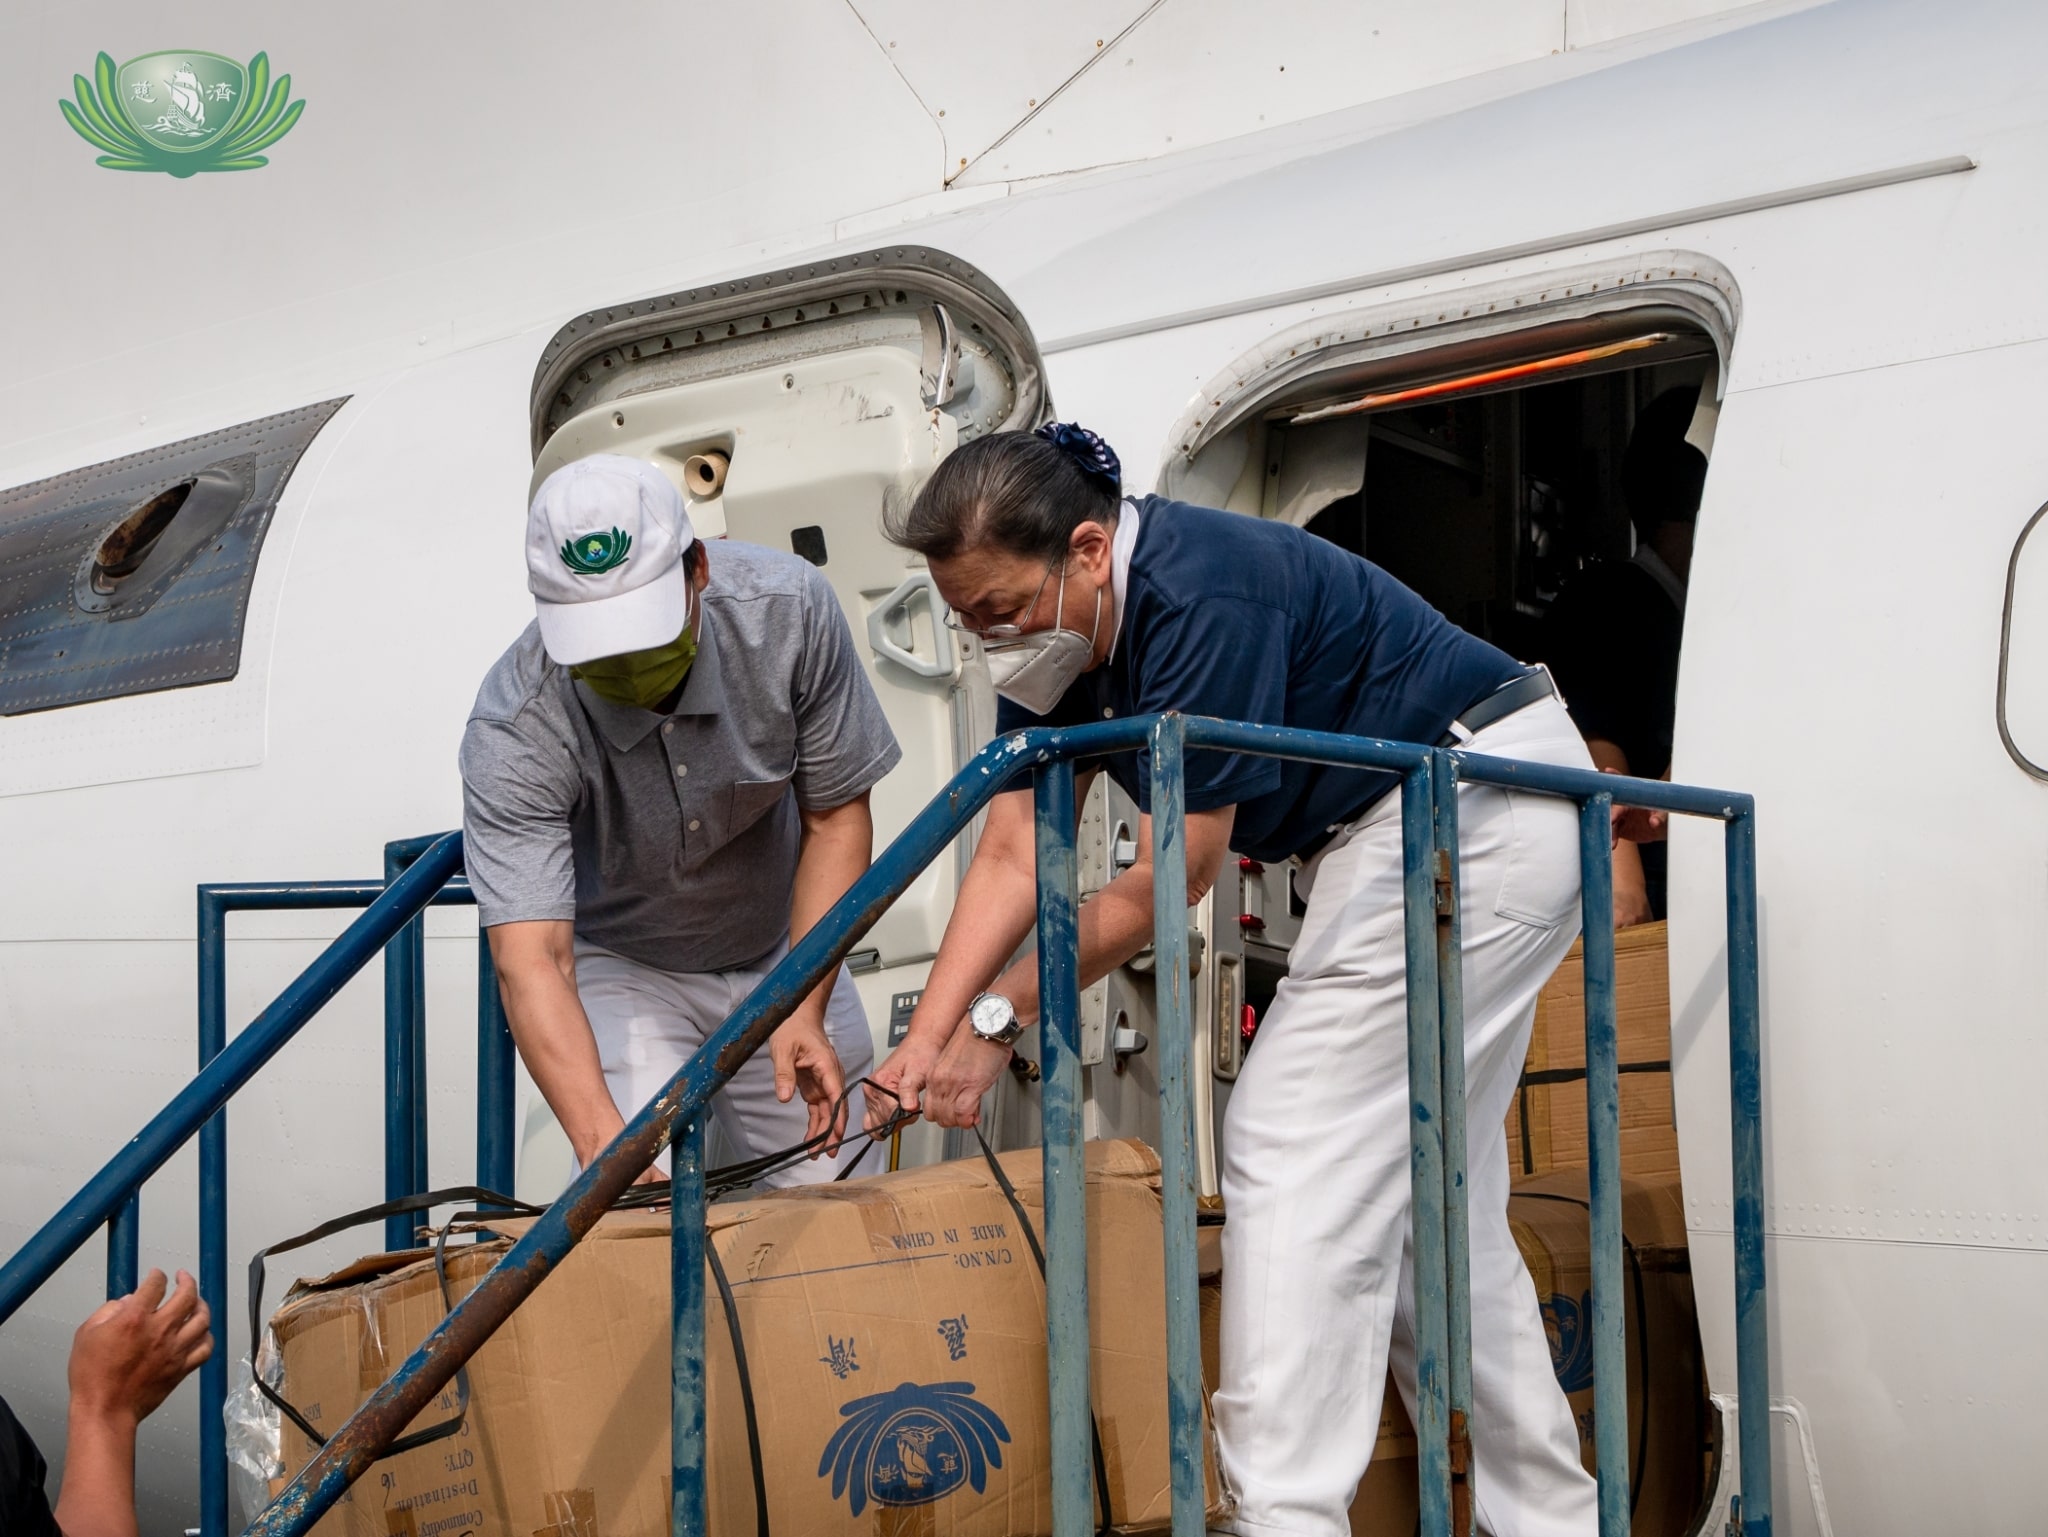 Volunteers work together to load boxes of fleece blankets into the private plane. 【Photo by Daniel Lazar】